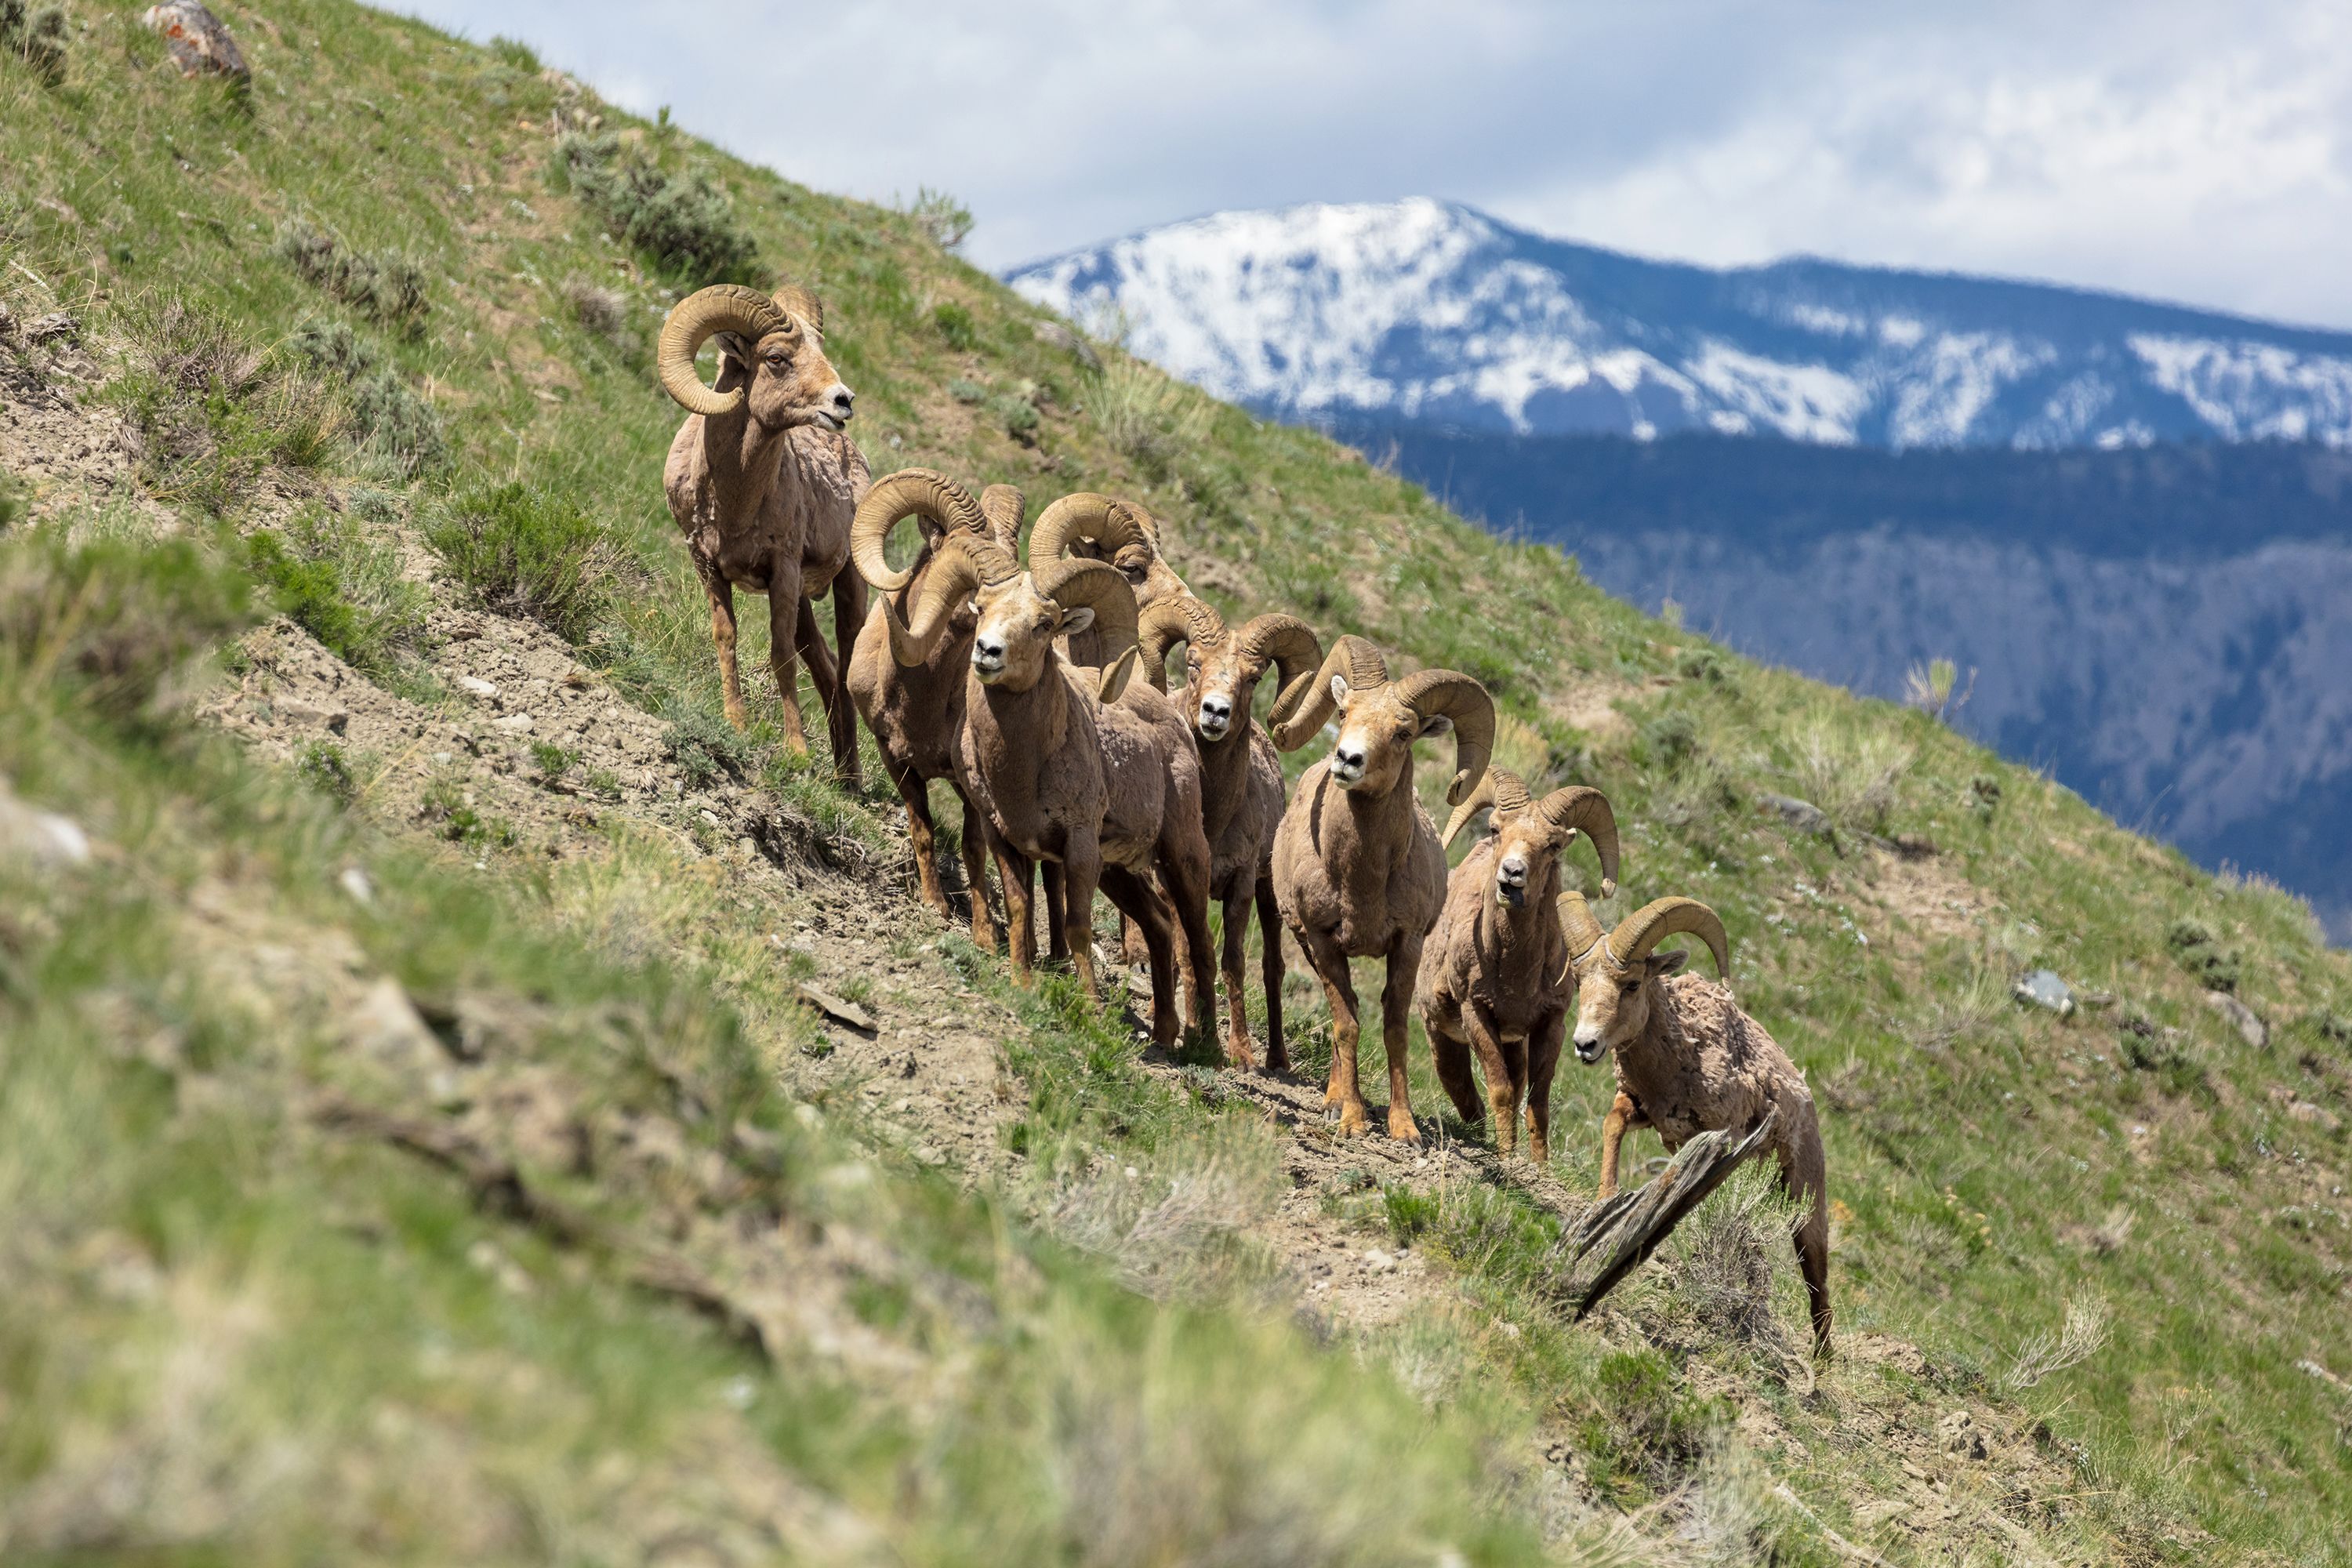 <strong>Bighorn sheep:</strong> Some 10 to 13 interbreeding bands of bighorn sheep occupy steep terrain in the upper Yellowstone River drainage, the NPS says. This group was seen on Mount Everts.